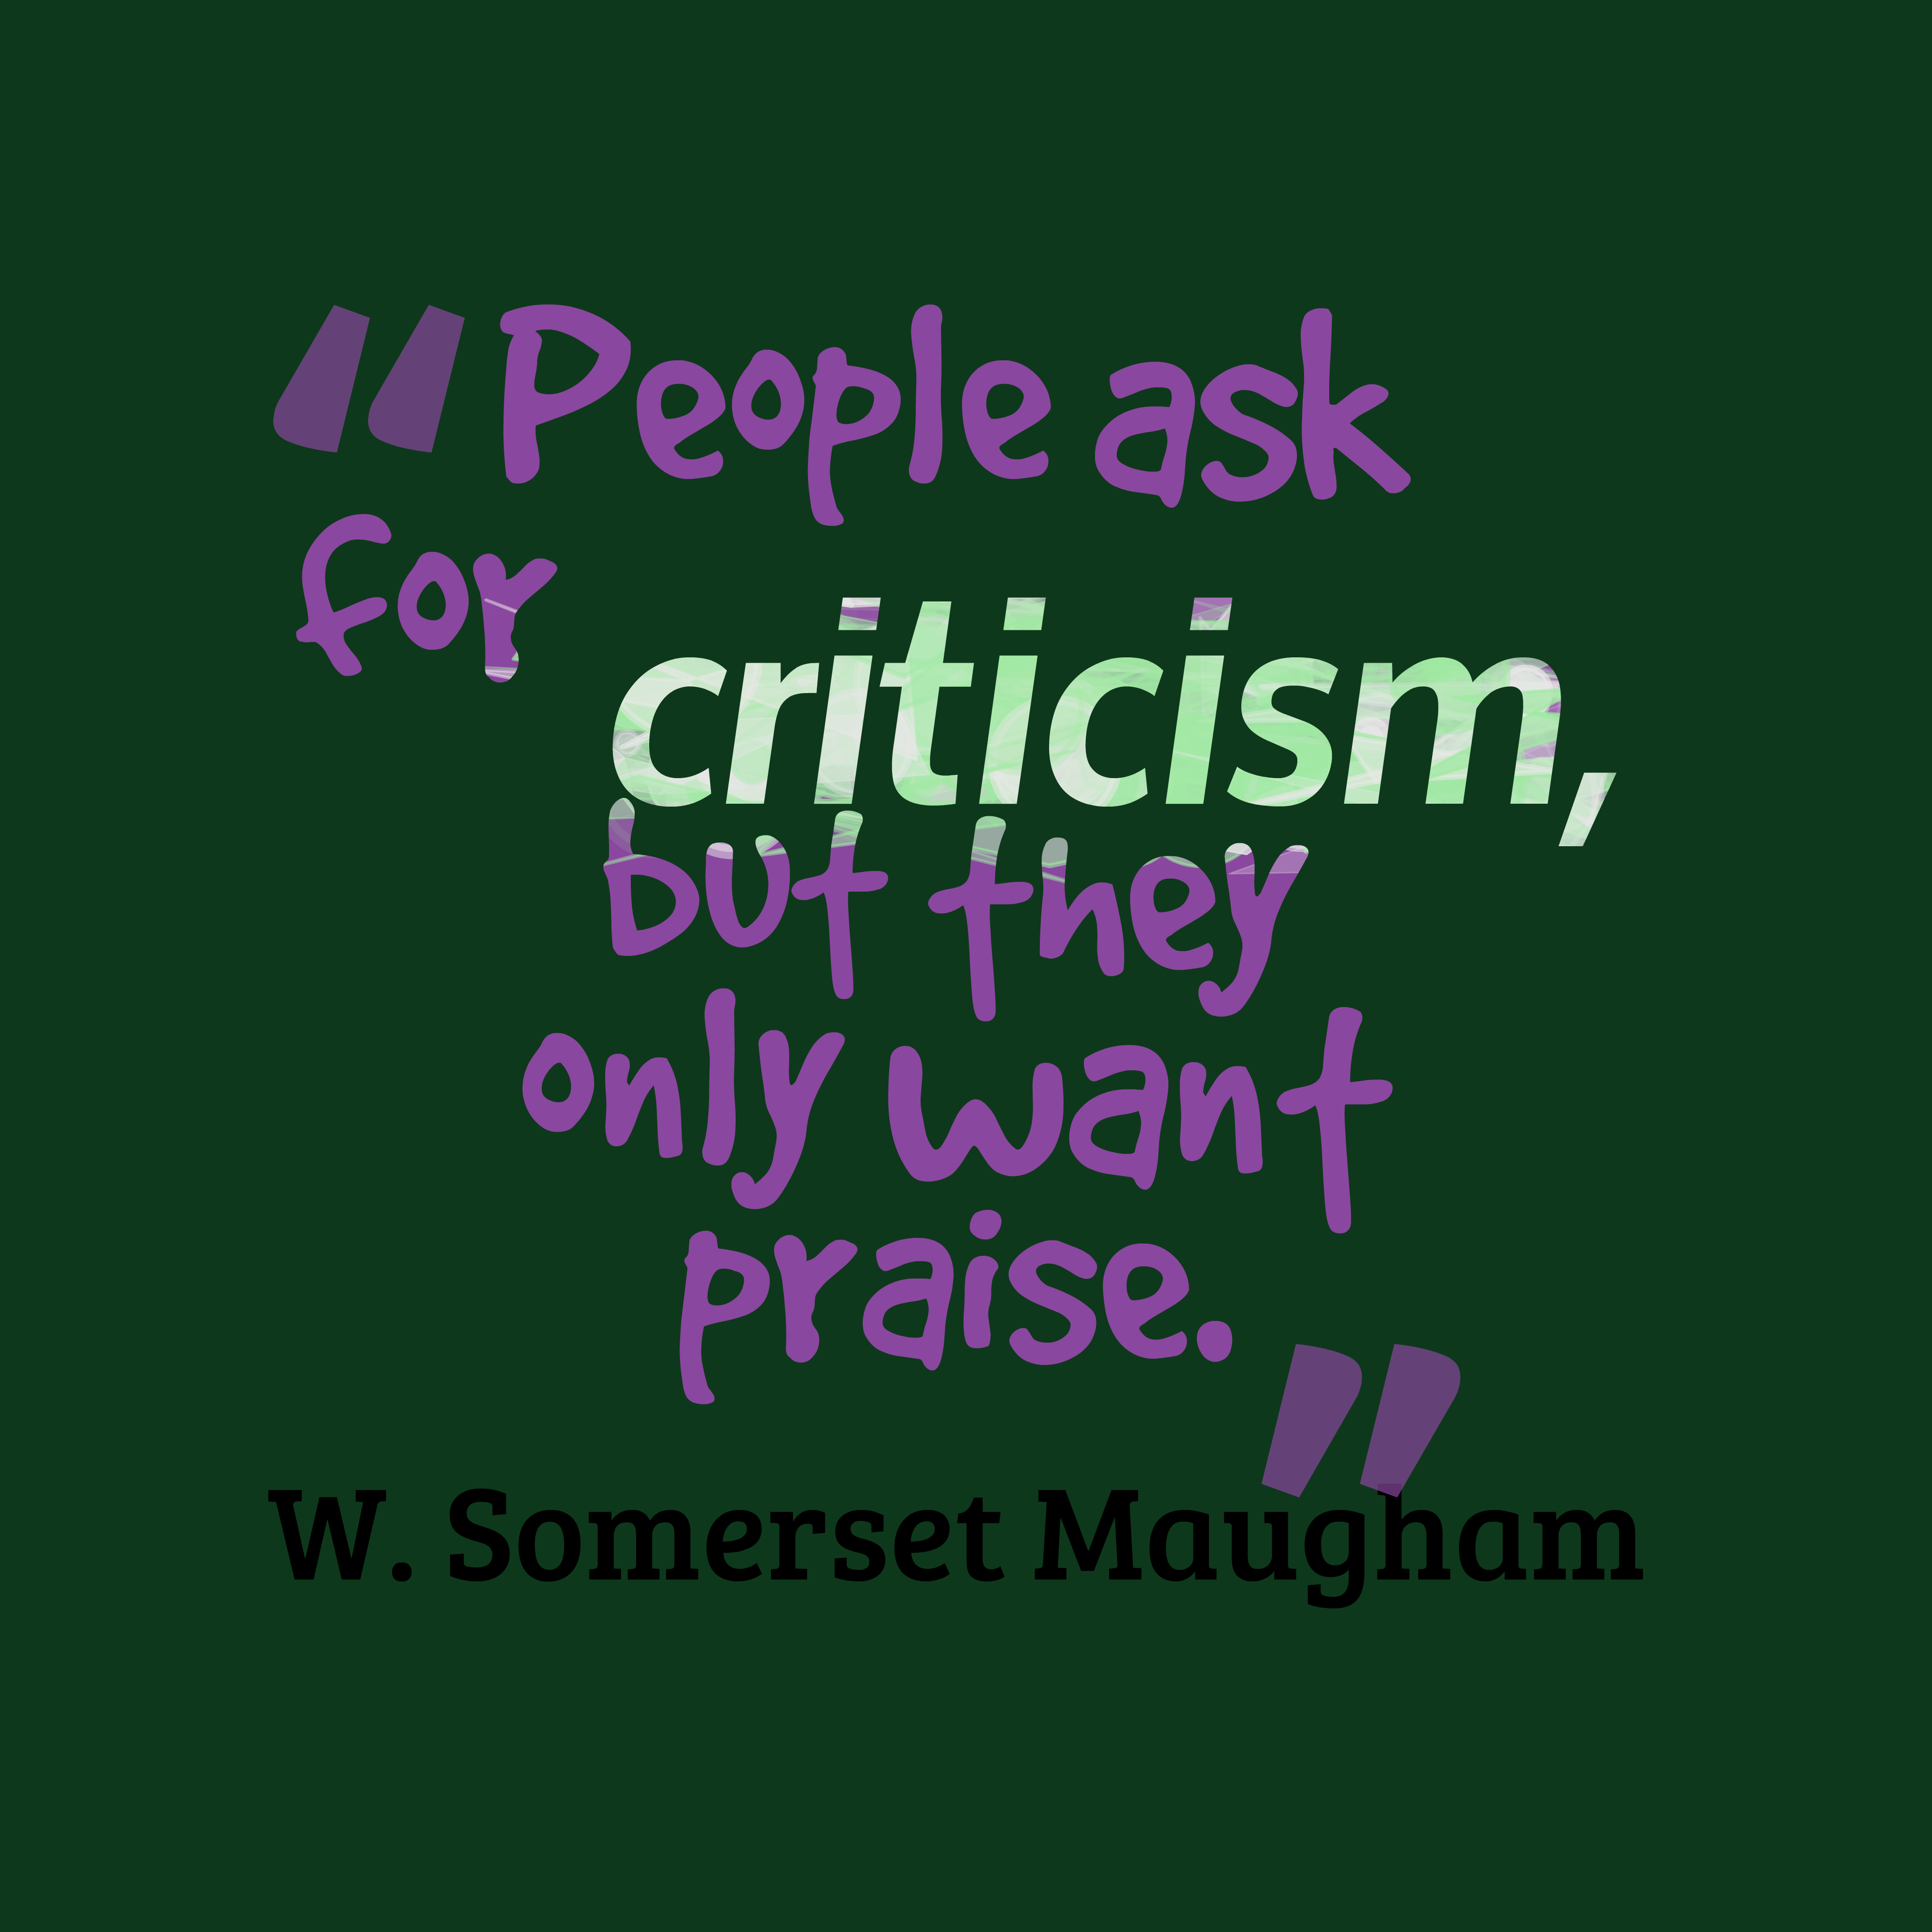 People ask for criticism, but they only want praise. W. Somerset Maugham